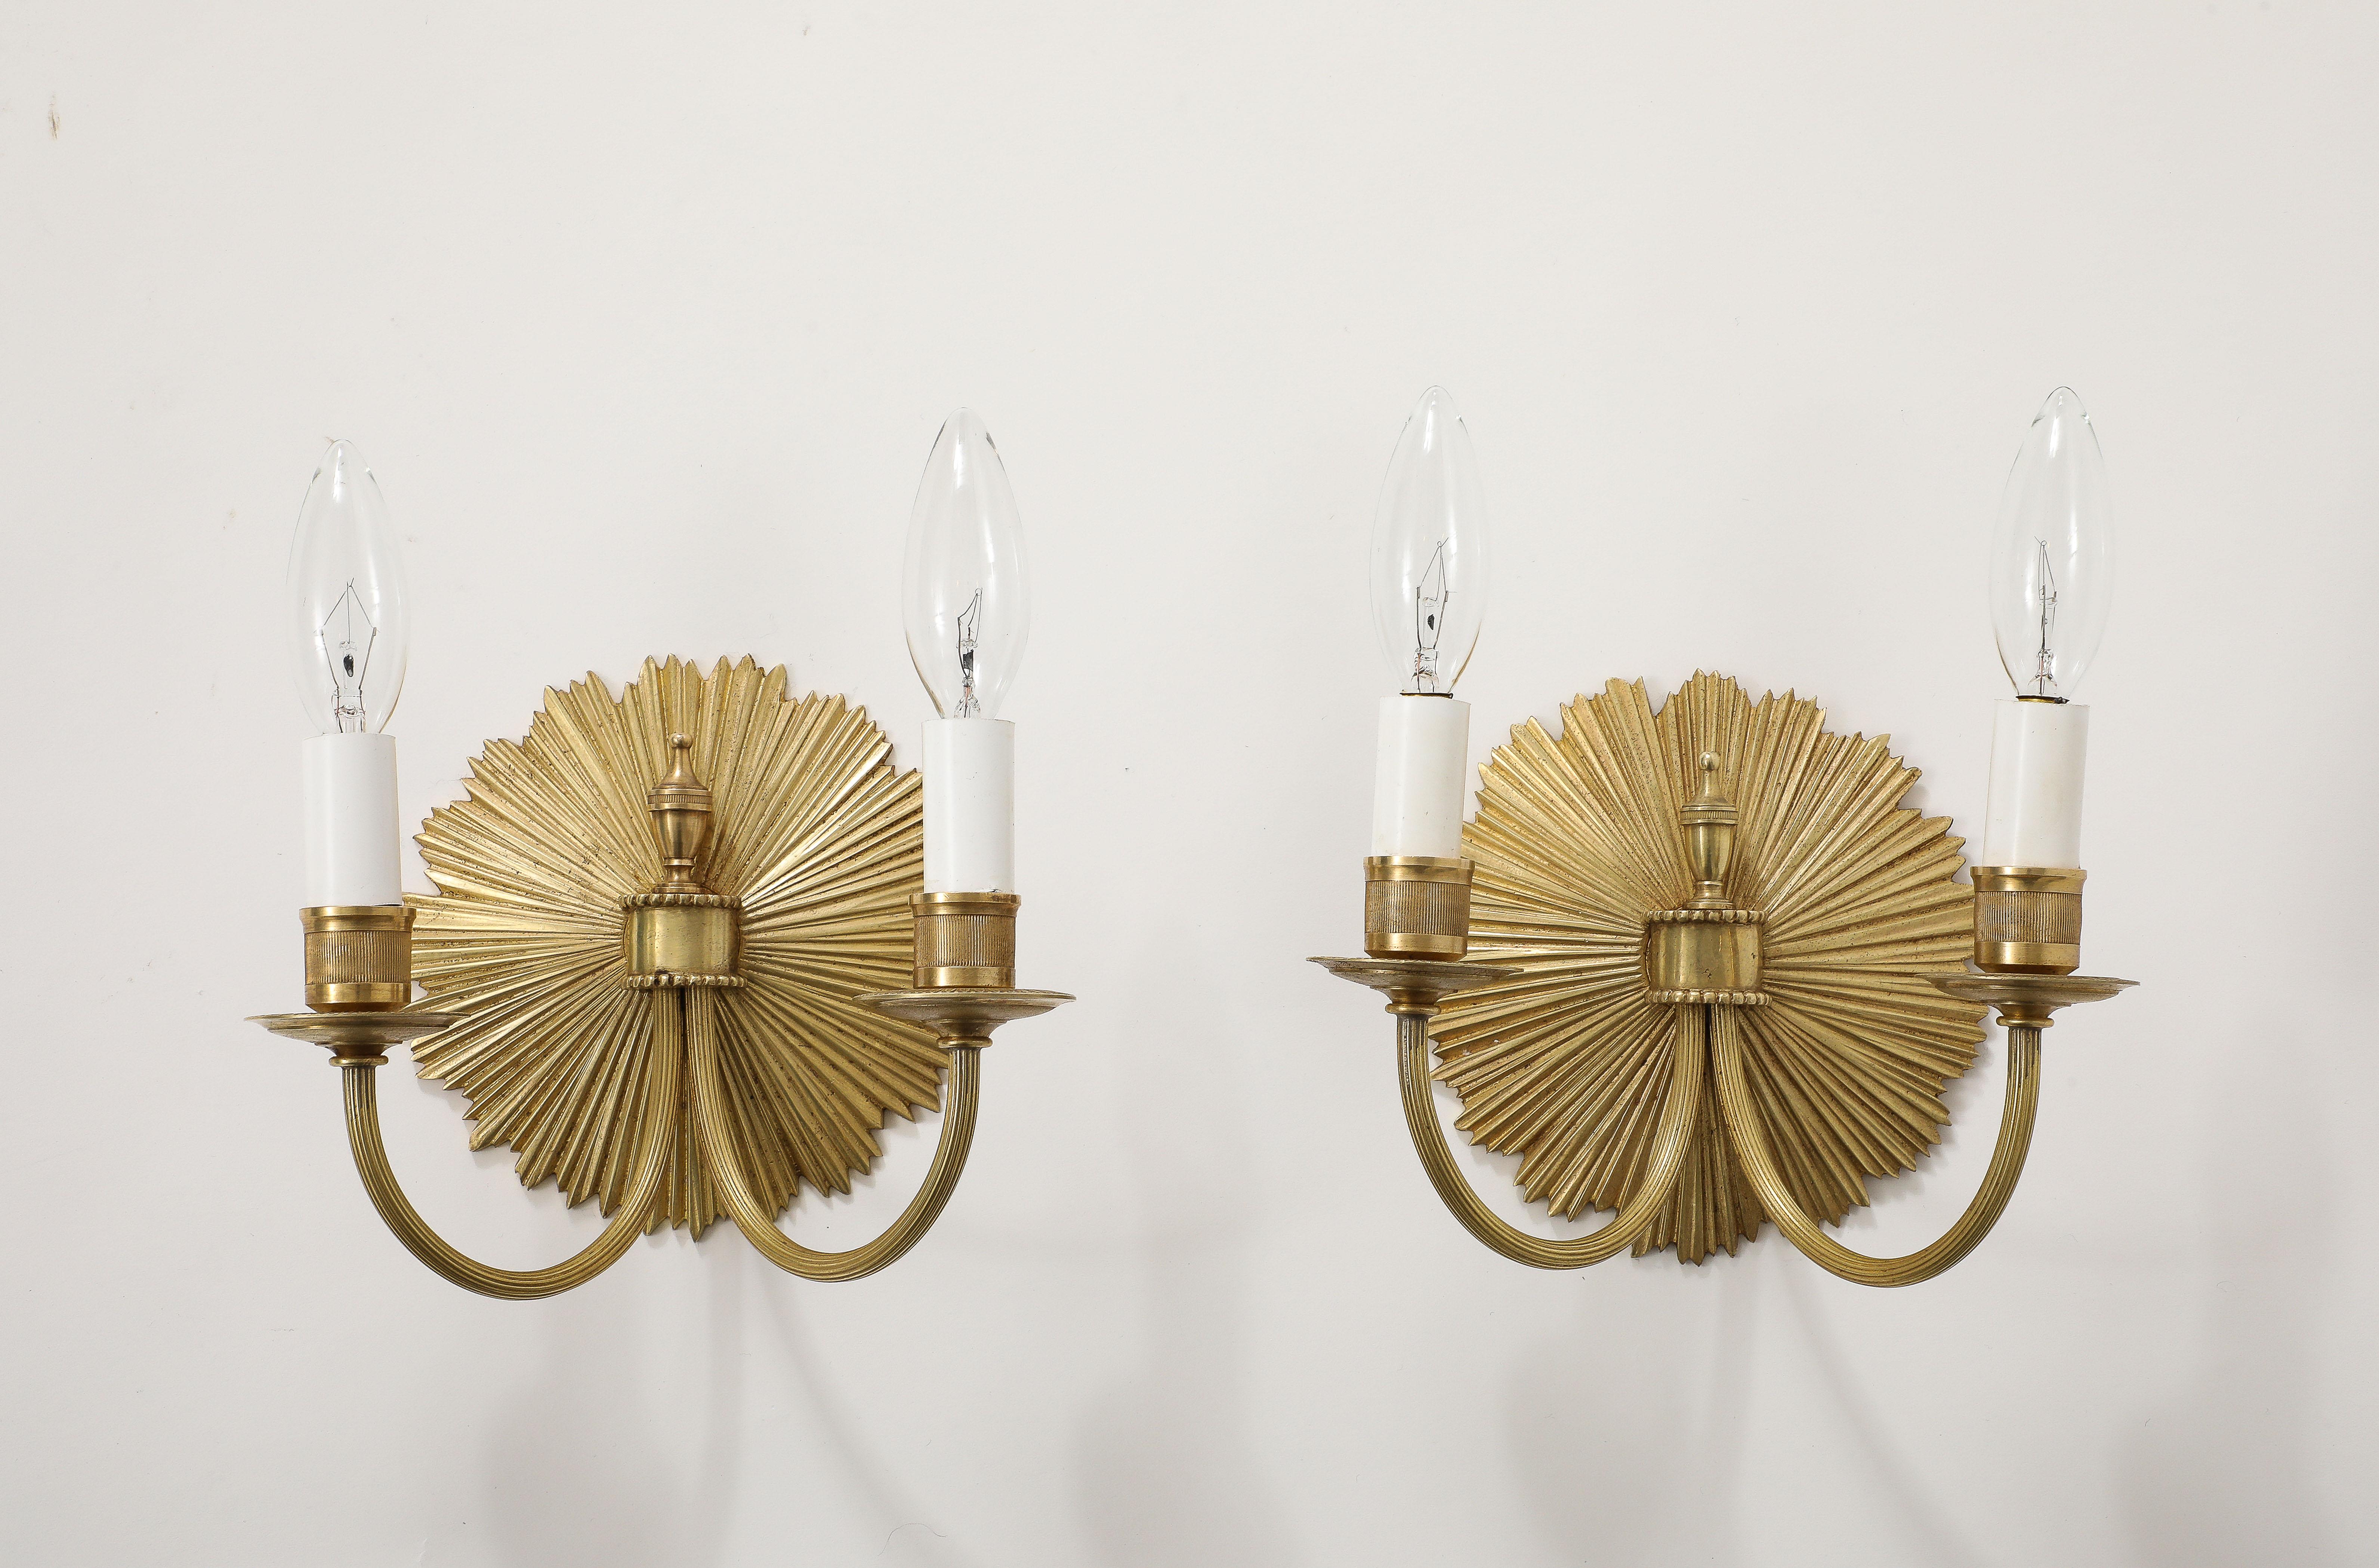 Beautiful pair of 1950's Maison Charles brass French wall sconces, newly rewired and lightly polished with minor wear and patina due to age and use.